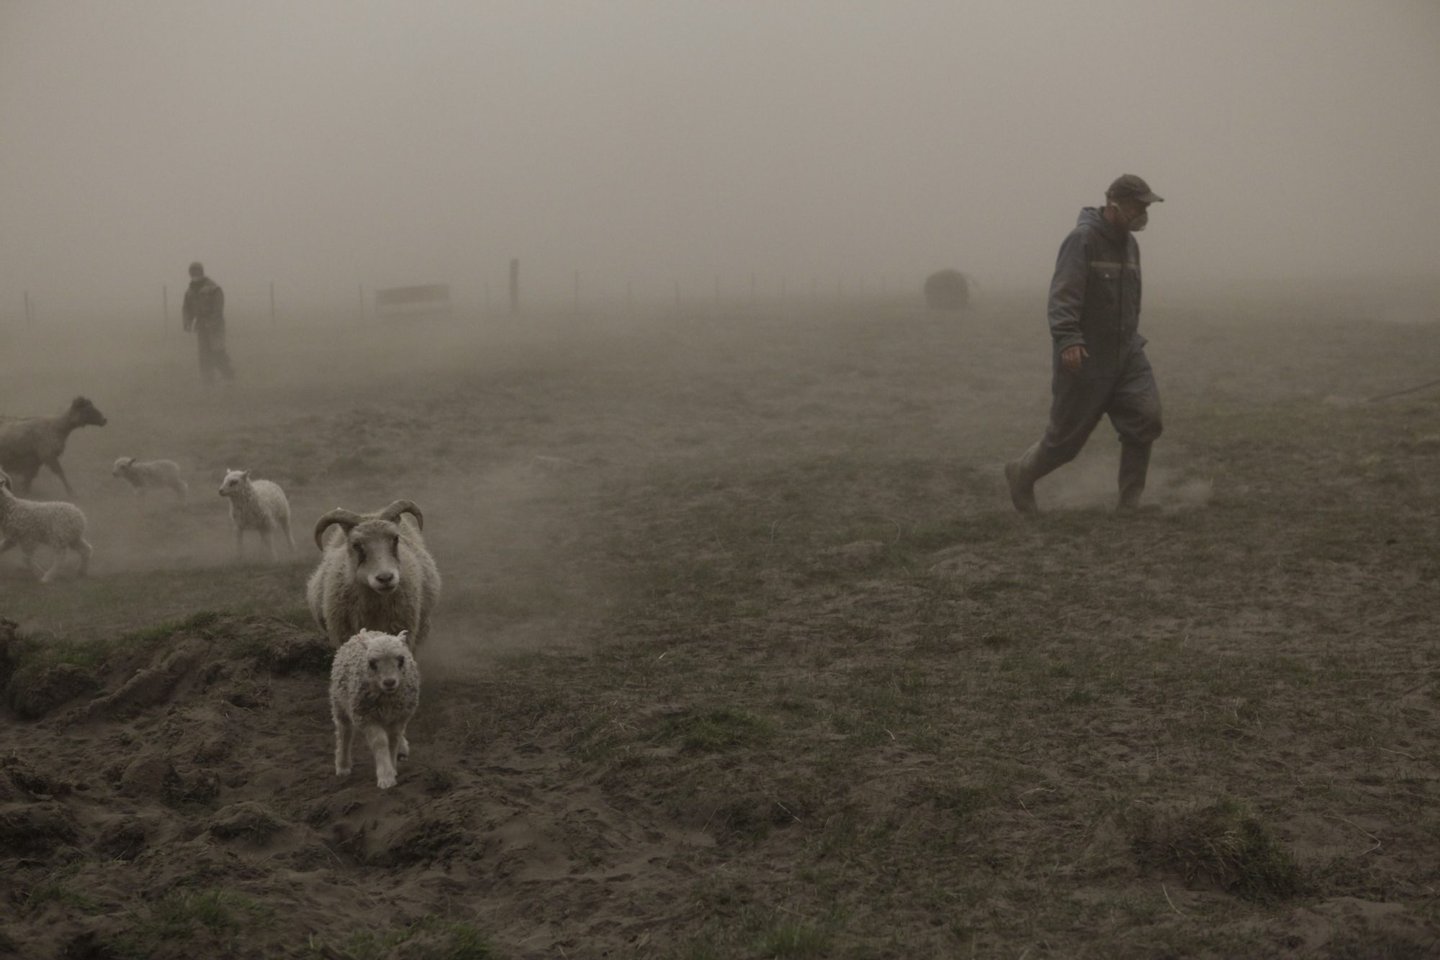 Sheep farmers try to round up a flock as they walk through a cloud of ash pouring out of the erupting Grimsvoetn volcano in Mulakot on May 22, 2011. Ash deposits were sprinkled over the capital Reykjavik, some 400 kilometres (250 miles) to the west of the volcano, which has spewed an ash cloud about 20 kilometres into the sky. Less than 24 hours after the eruption began late Saturday, experts and authorities in Iceland said the volcanic activity had begun to decline. AFP PHOTO / Vilhelm Gunnarsson ***ICELAND OUT*** (Photo credit should read Vilhelm Gunnarsson/AFP/Getty Images)